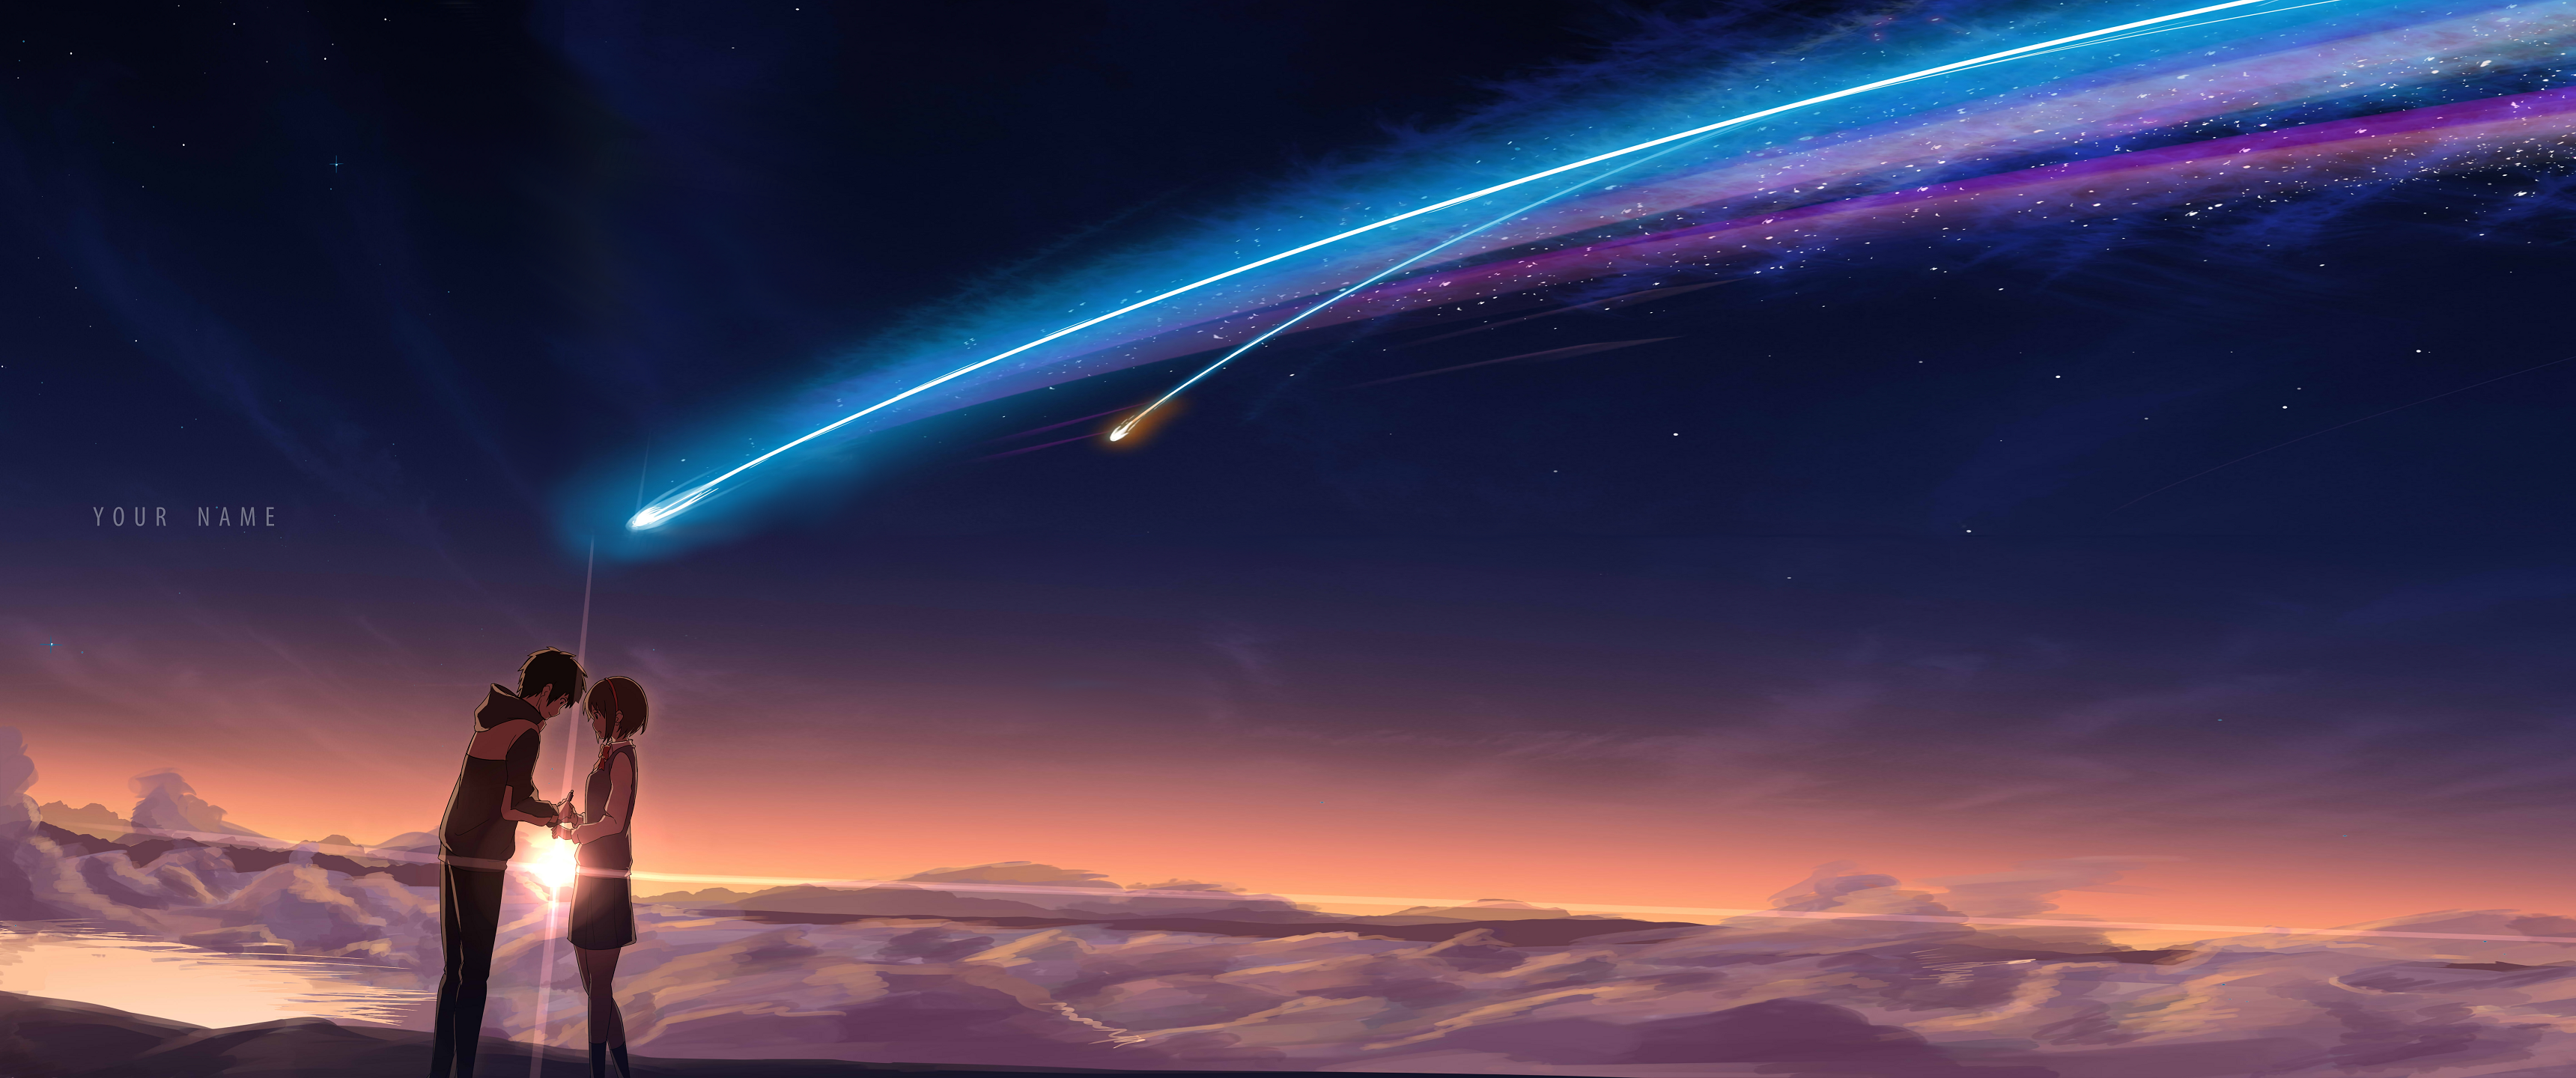 Movie Your Name 2016 - HD Wallpaper 